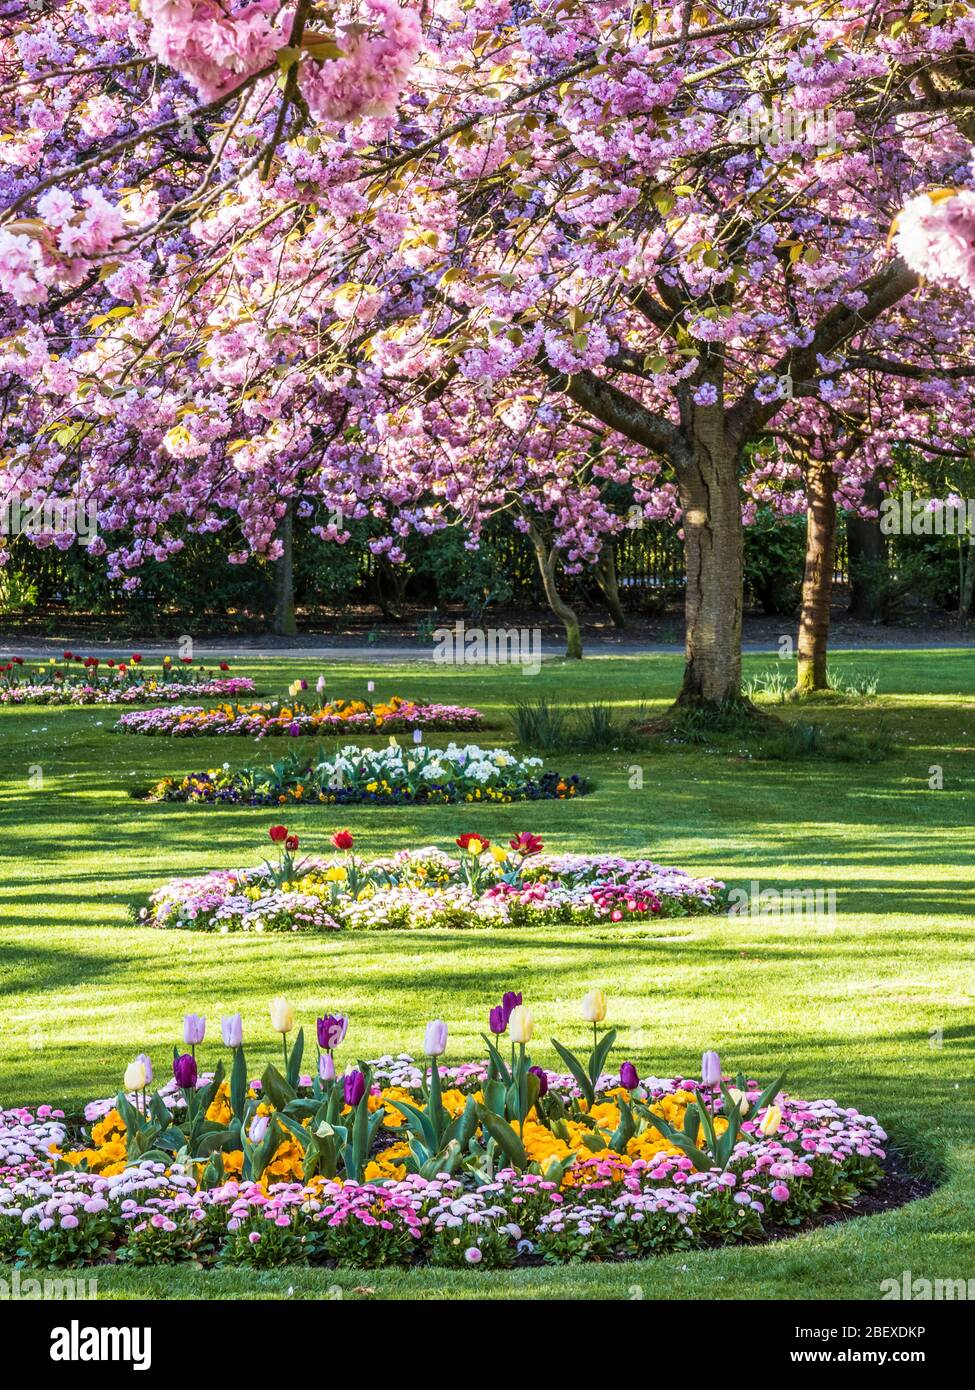 Flower beds and flowering pink cherry trees  in an urban public park in England. Stock Photo